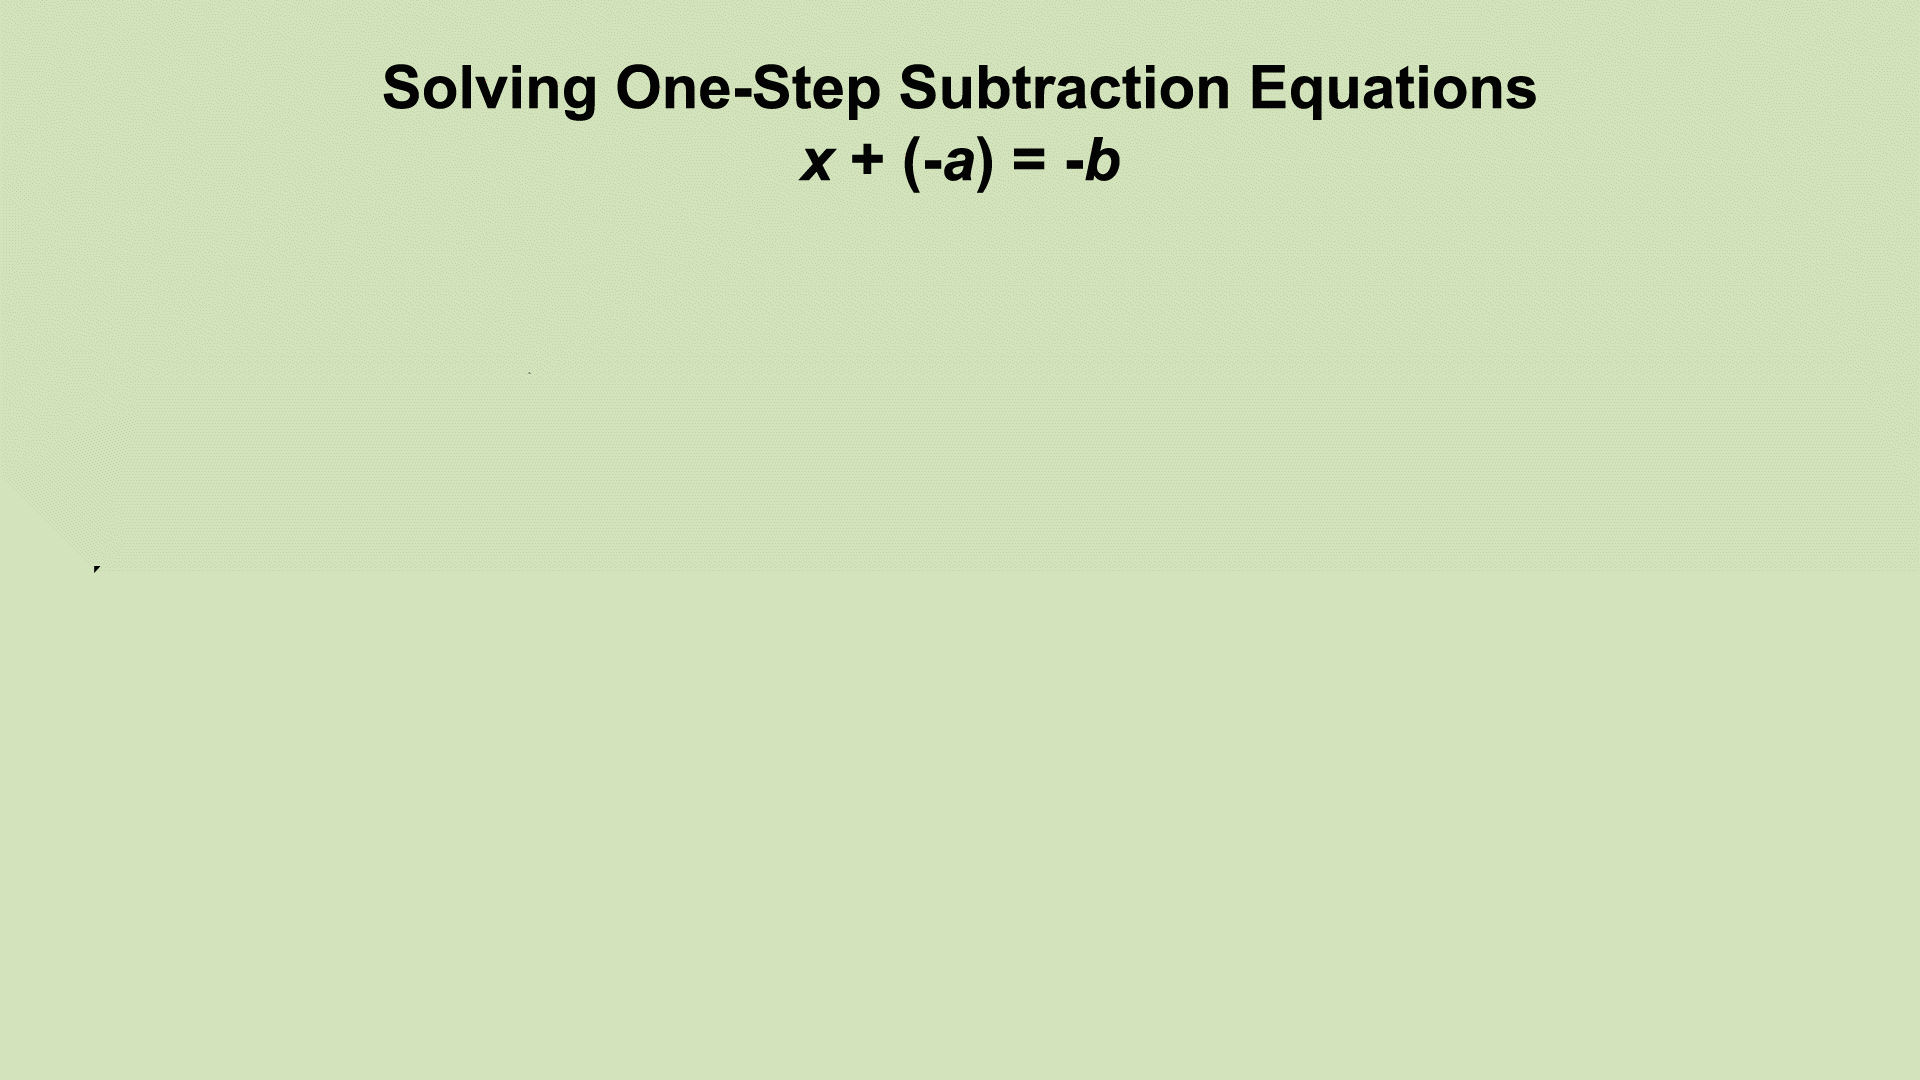 In this example the one-step equation shows subtraction of a negative number.